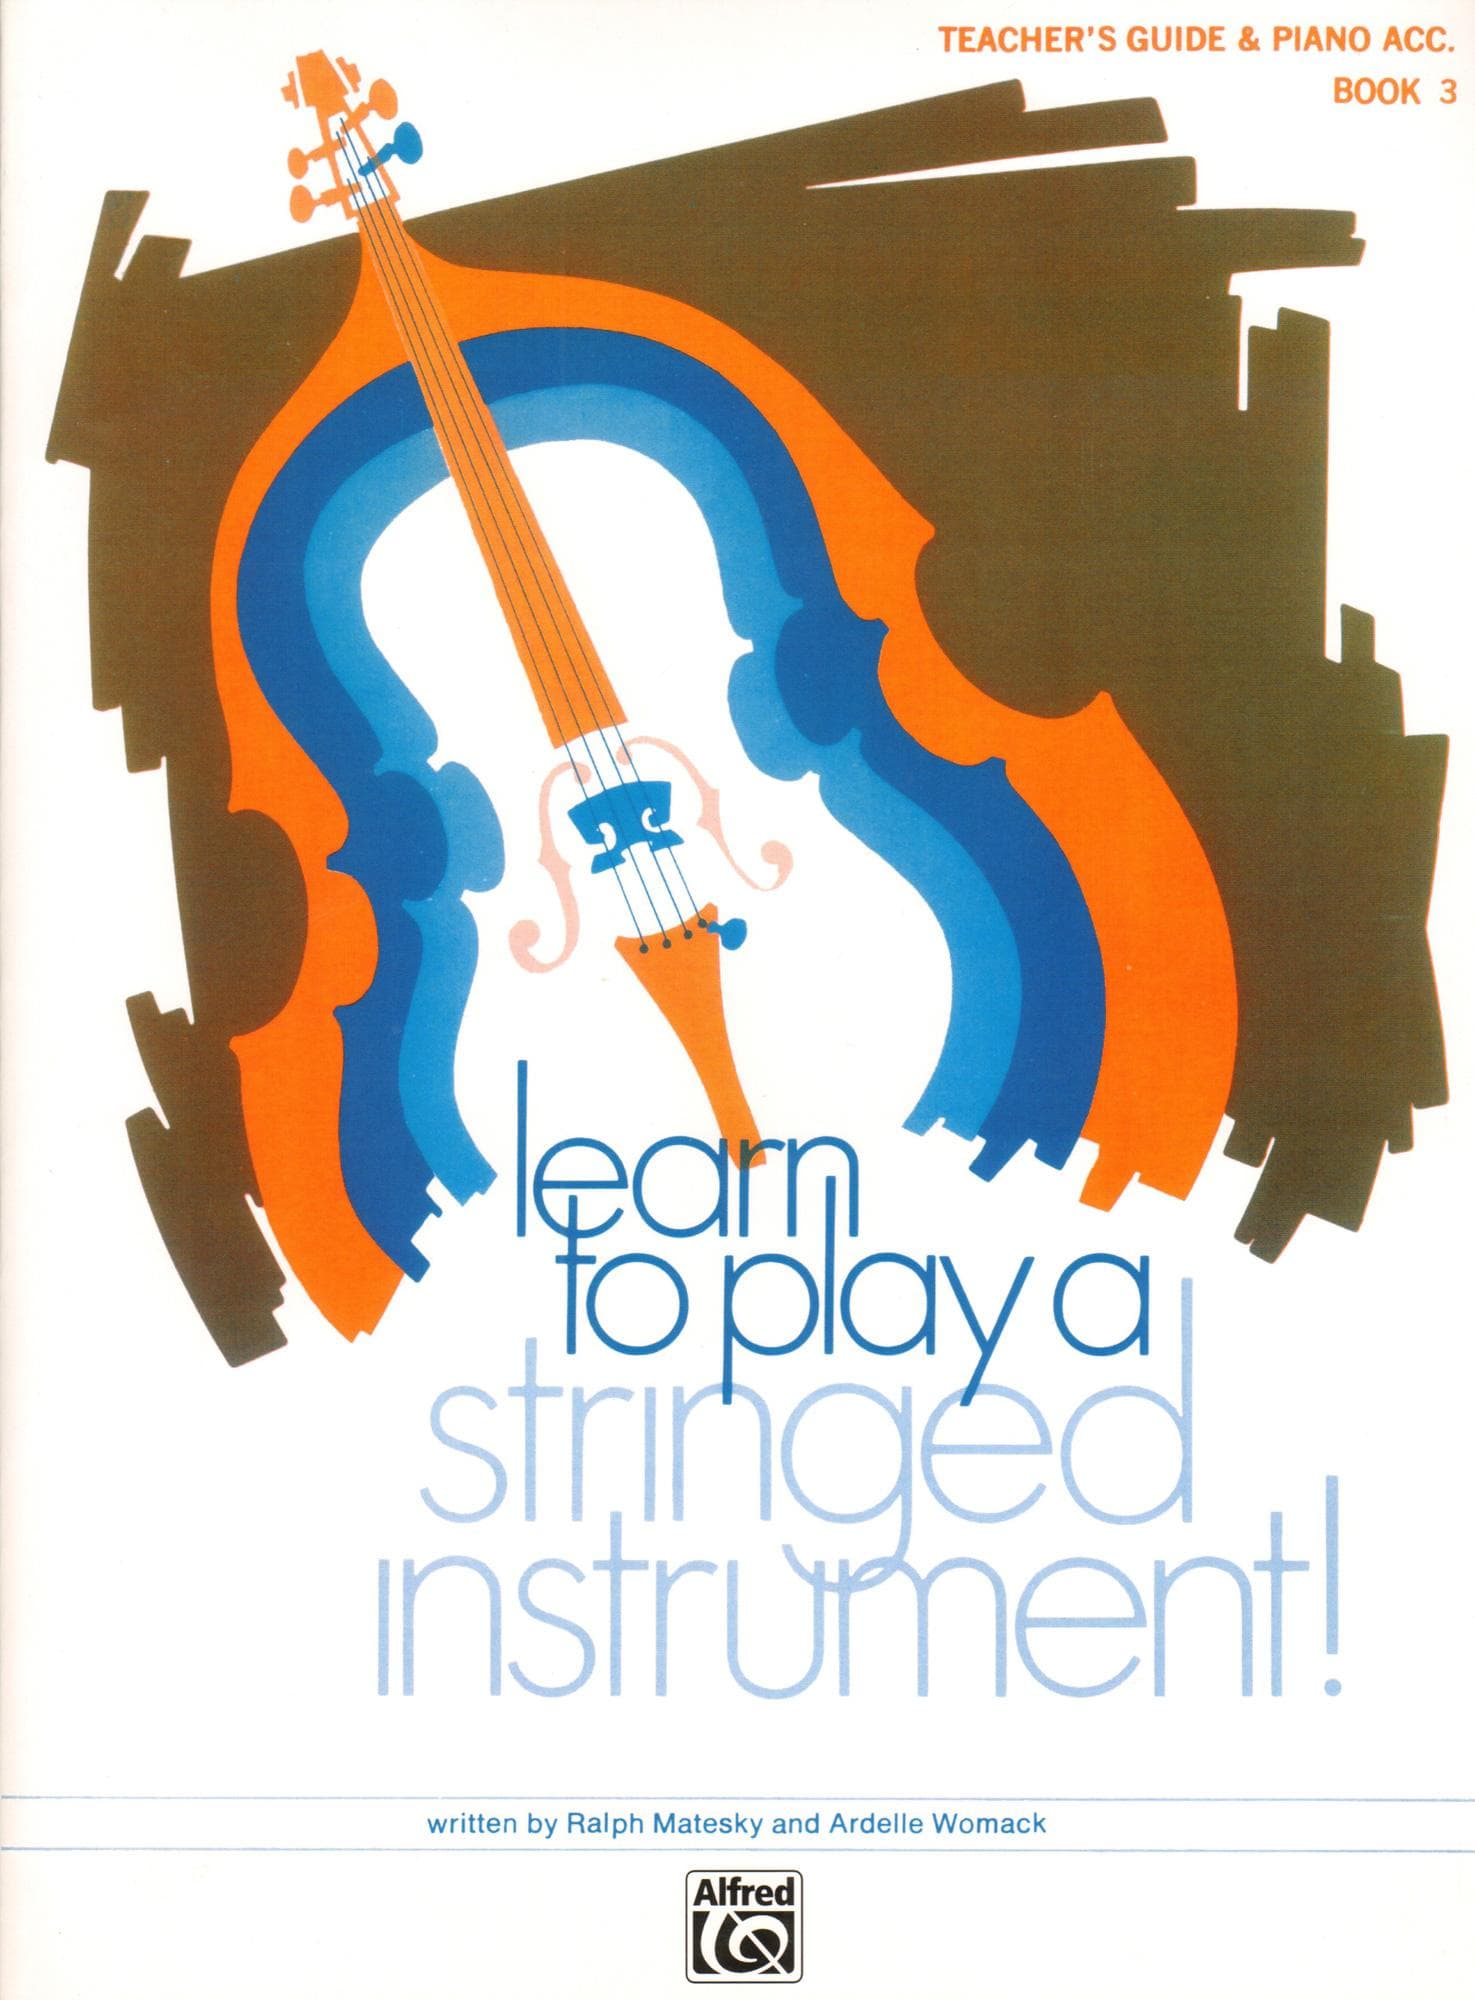 Matesky/Womack - Learn to Play A Stringed Instrument! Book 3 - Teacher's Guide/Piano Accompaniment - Alfred Music Publishing